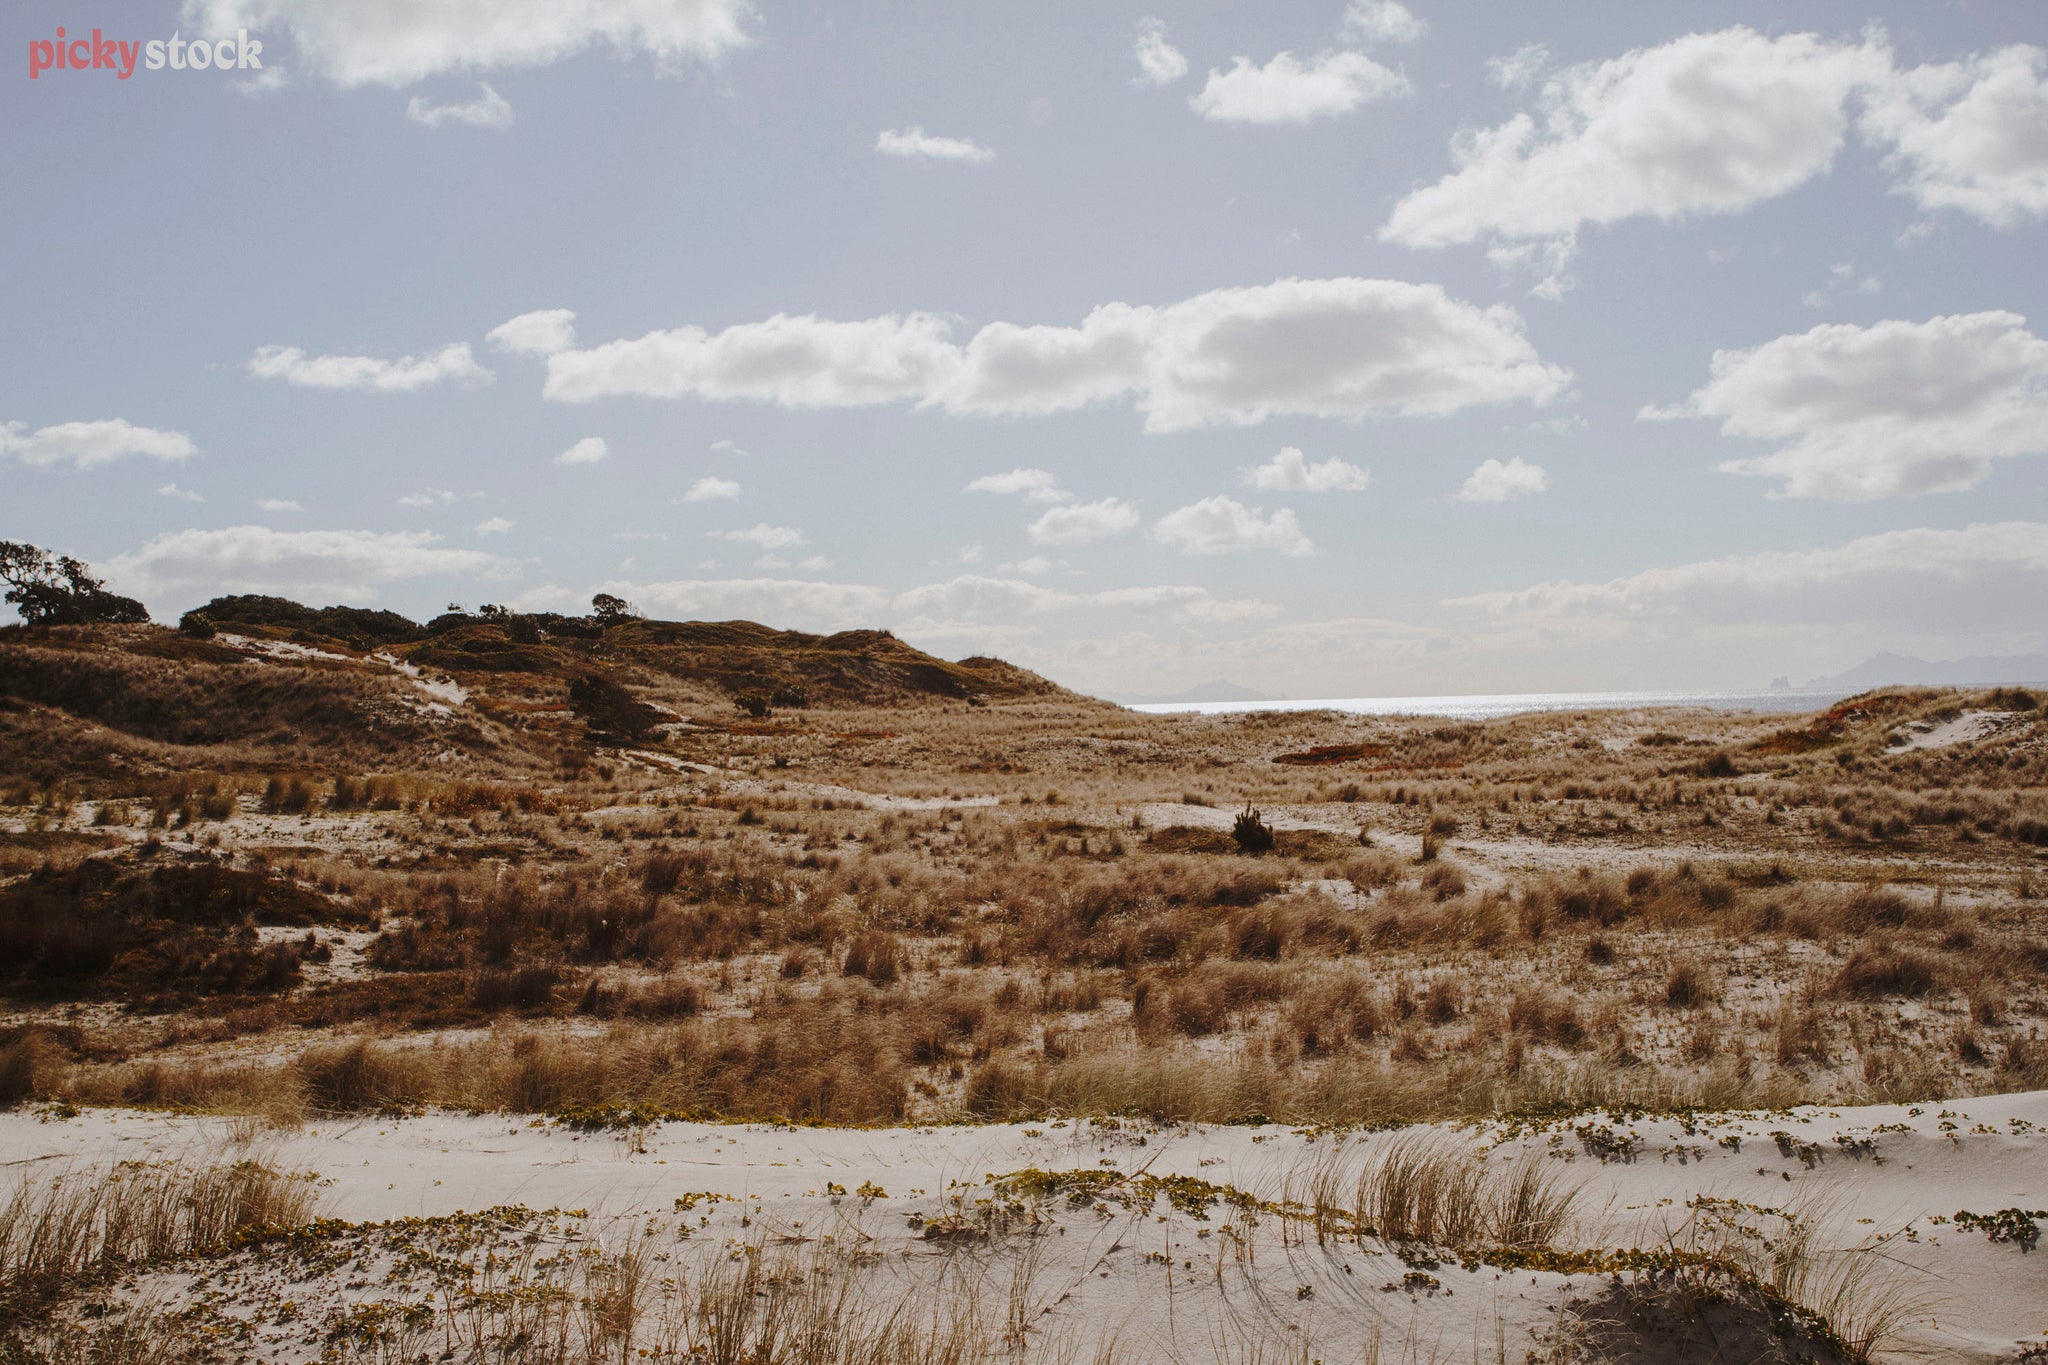 Looking from the sea inland towards the tussock-covered sand dunes on a warm blue and cloudy day. No people in sight. 